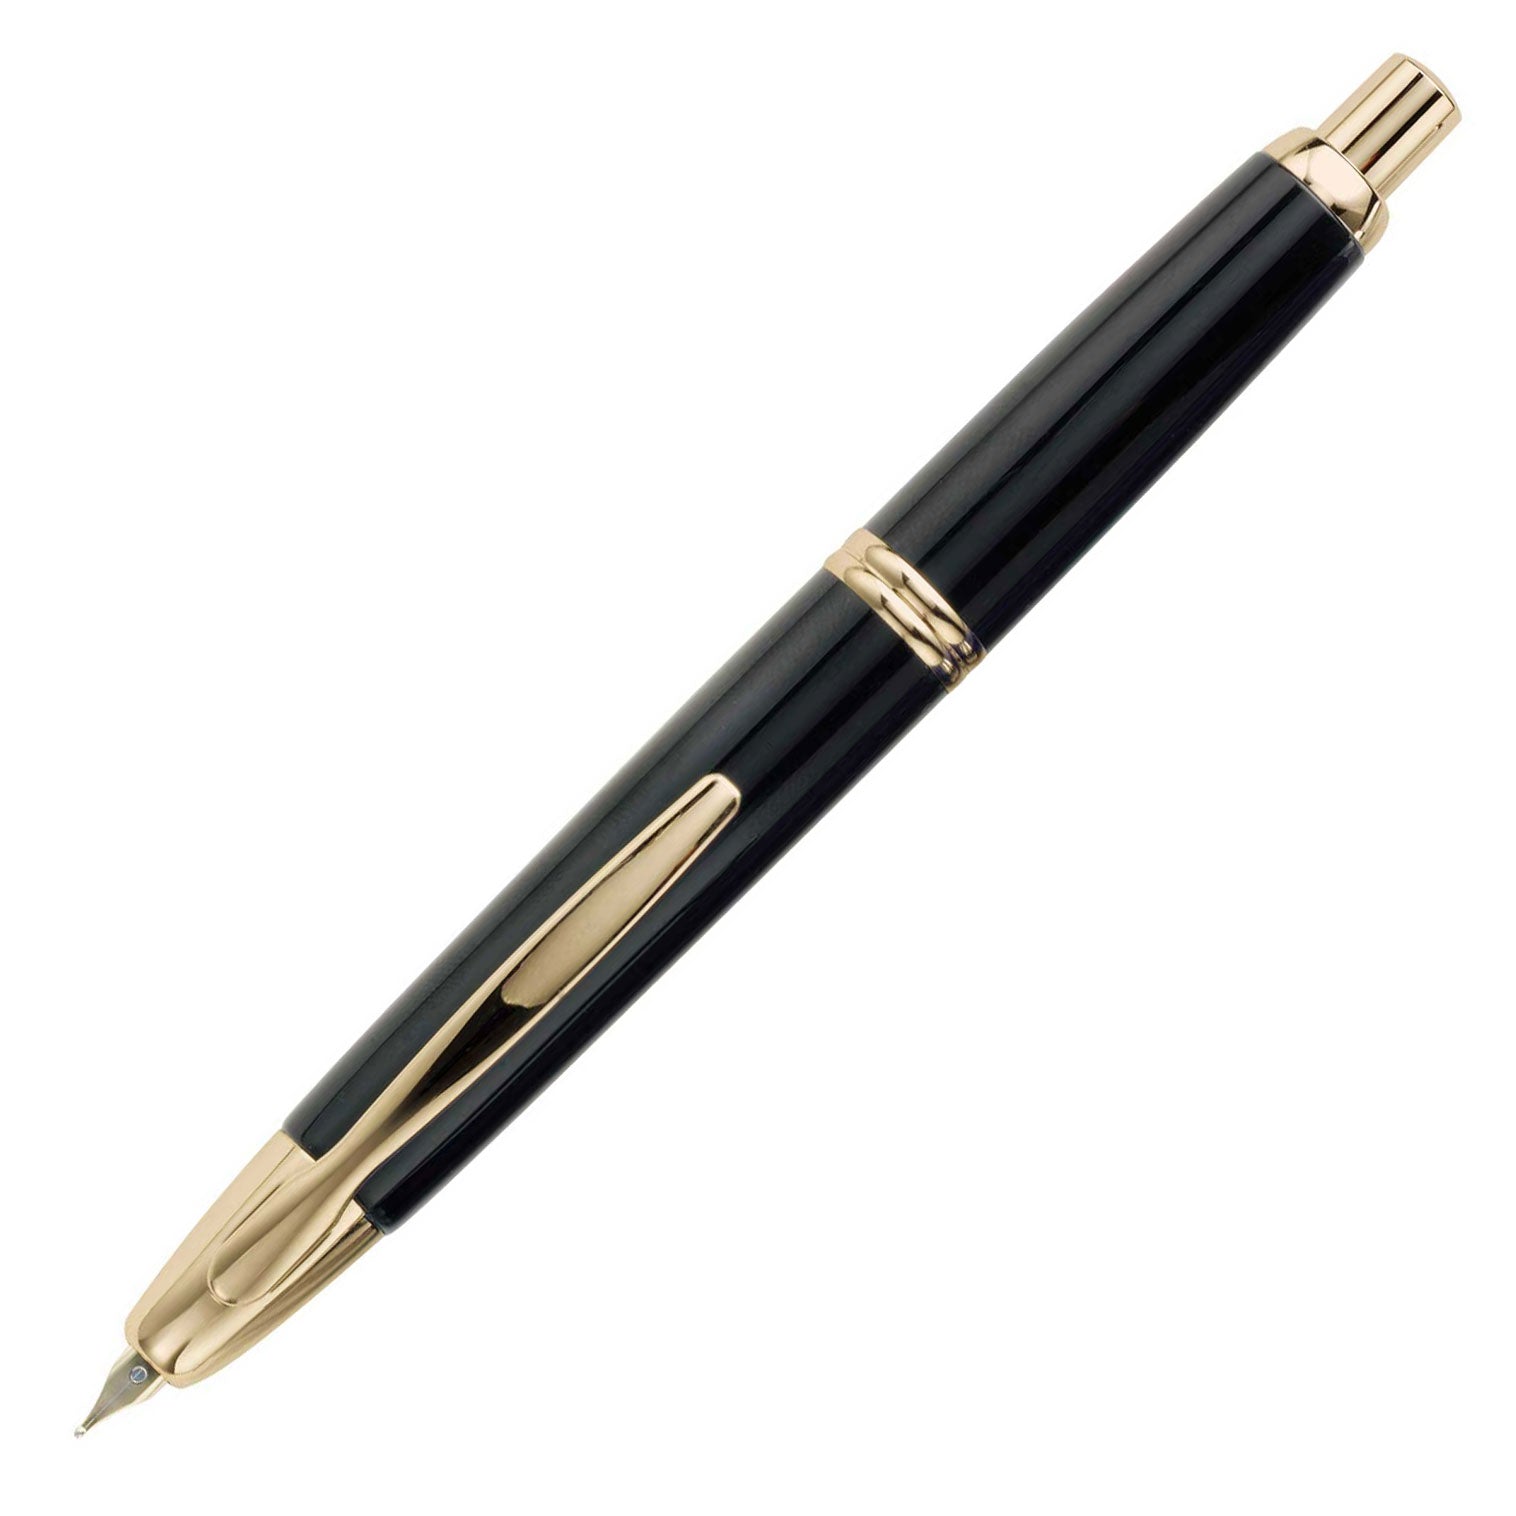 Pilot Vanishing Point Retractable Fountain Pen Black with Gold Accents